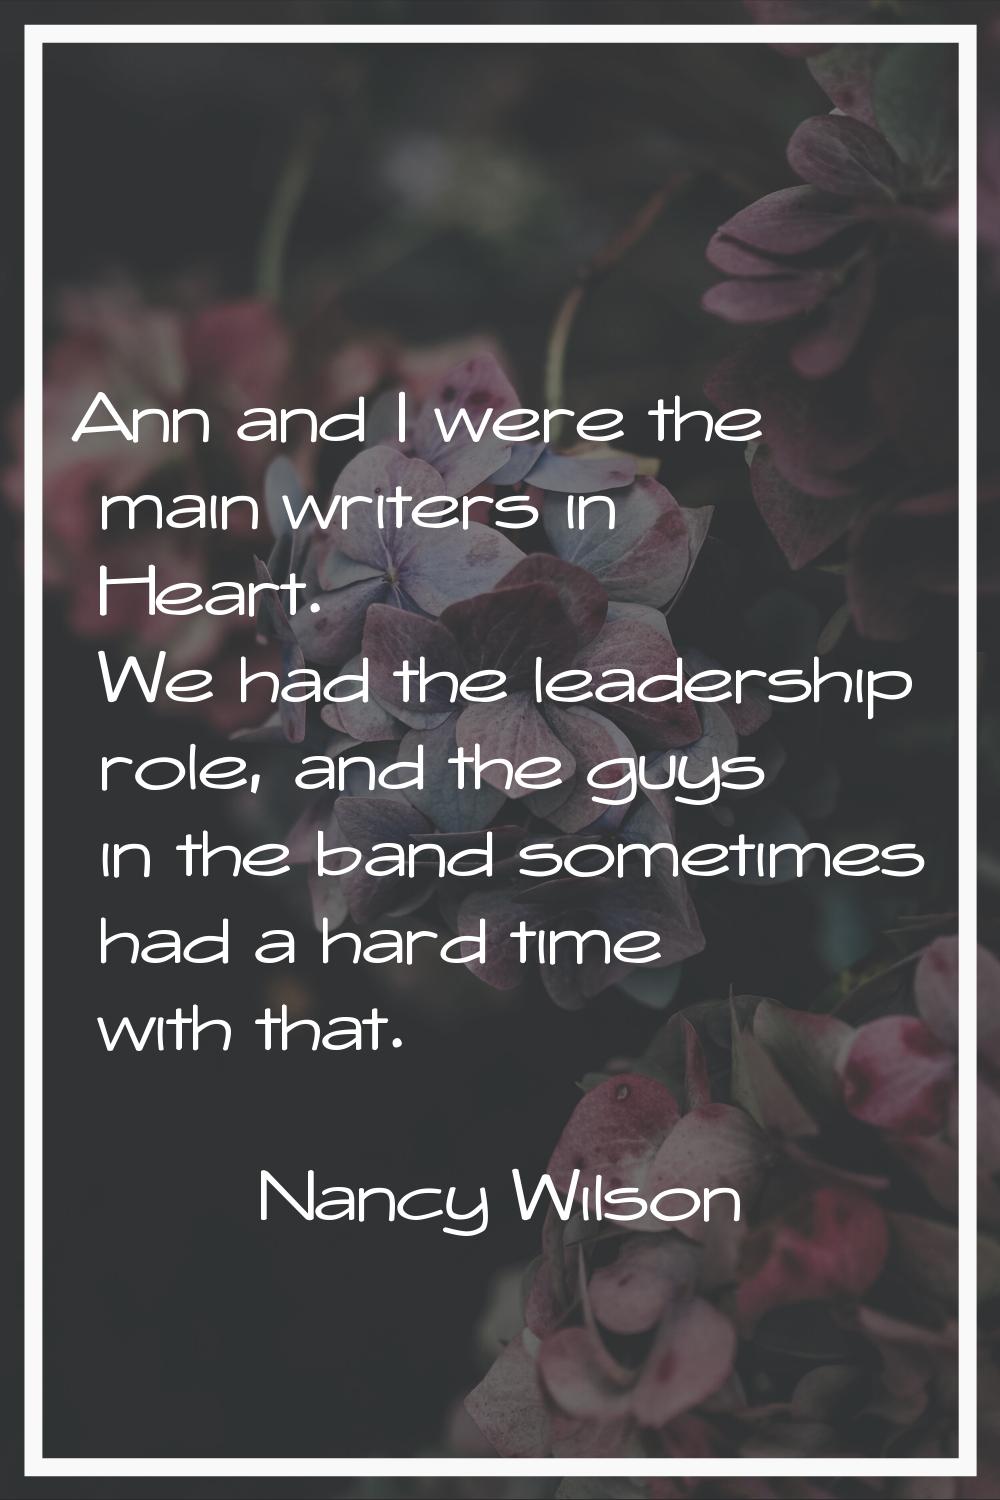 Ann and I were the main writers in Heart. We had the leadership role, and the guys in the band some